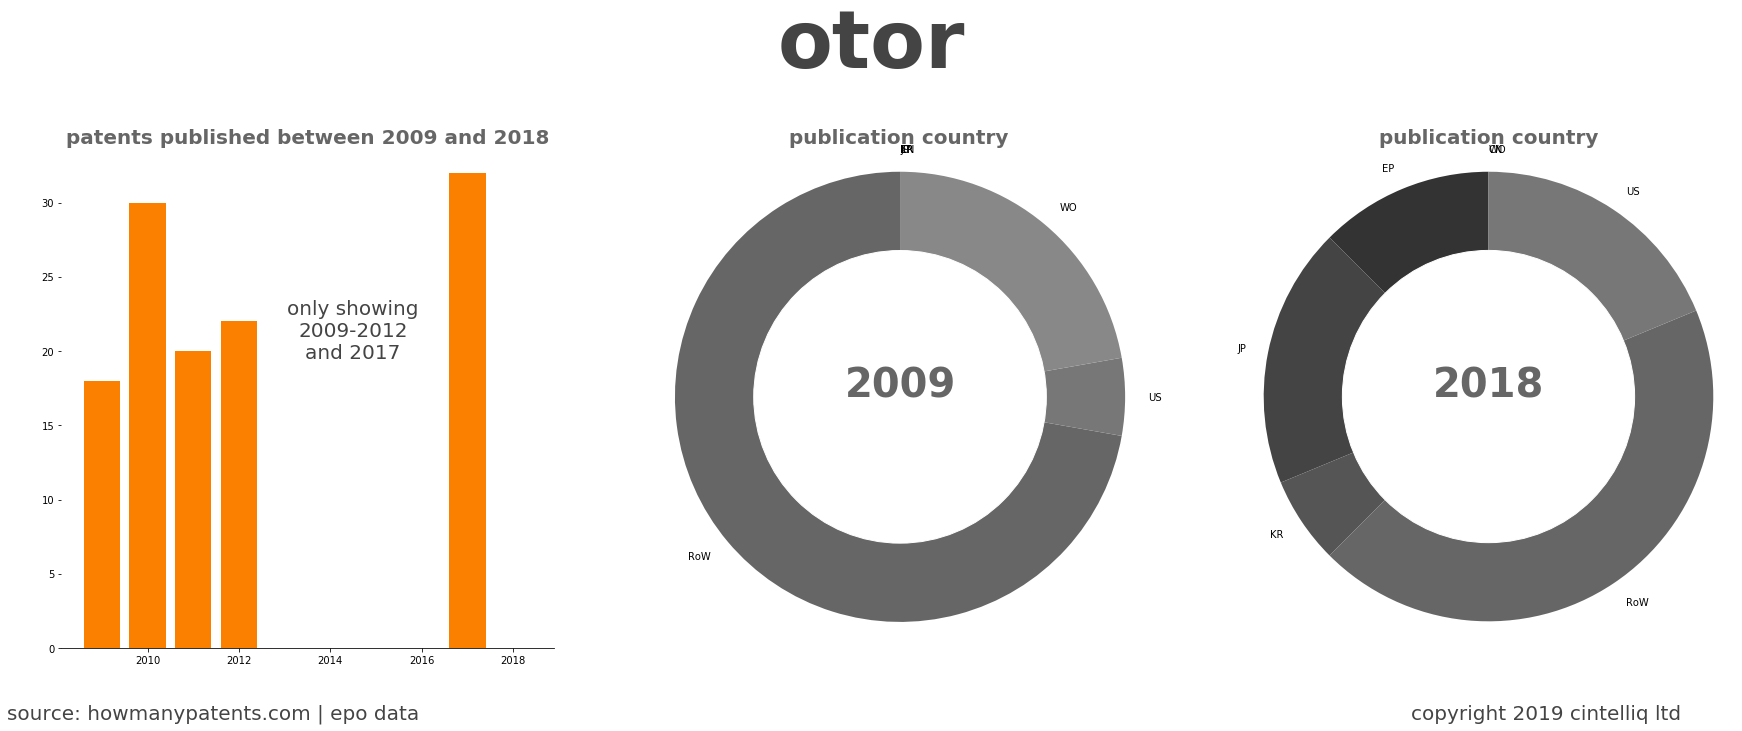 summary of patents for Otor